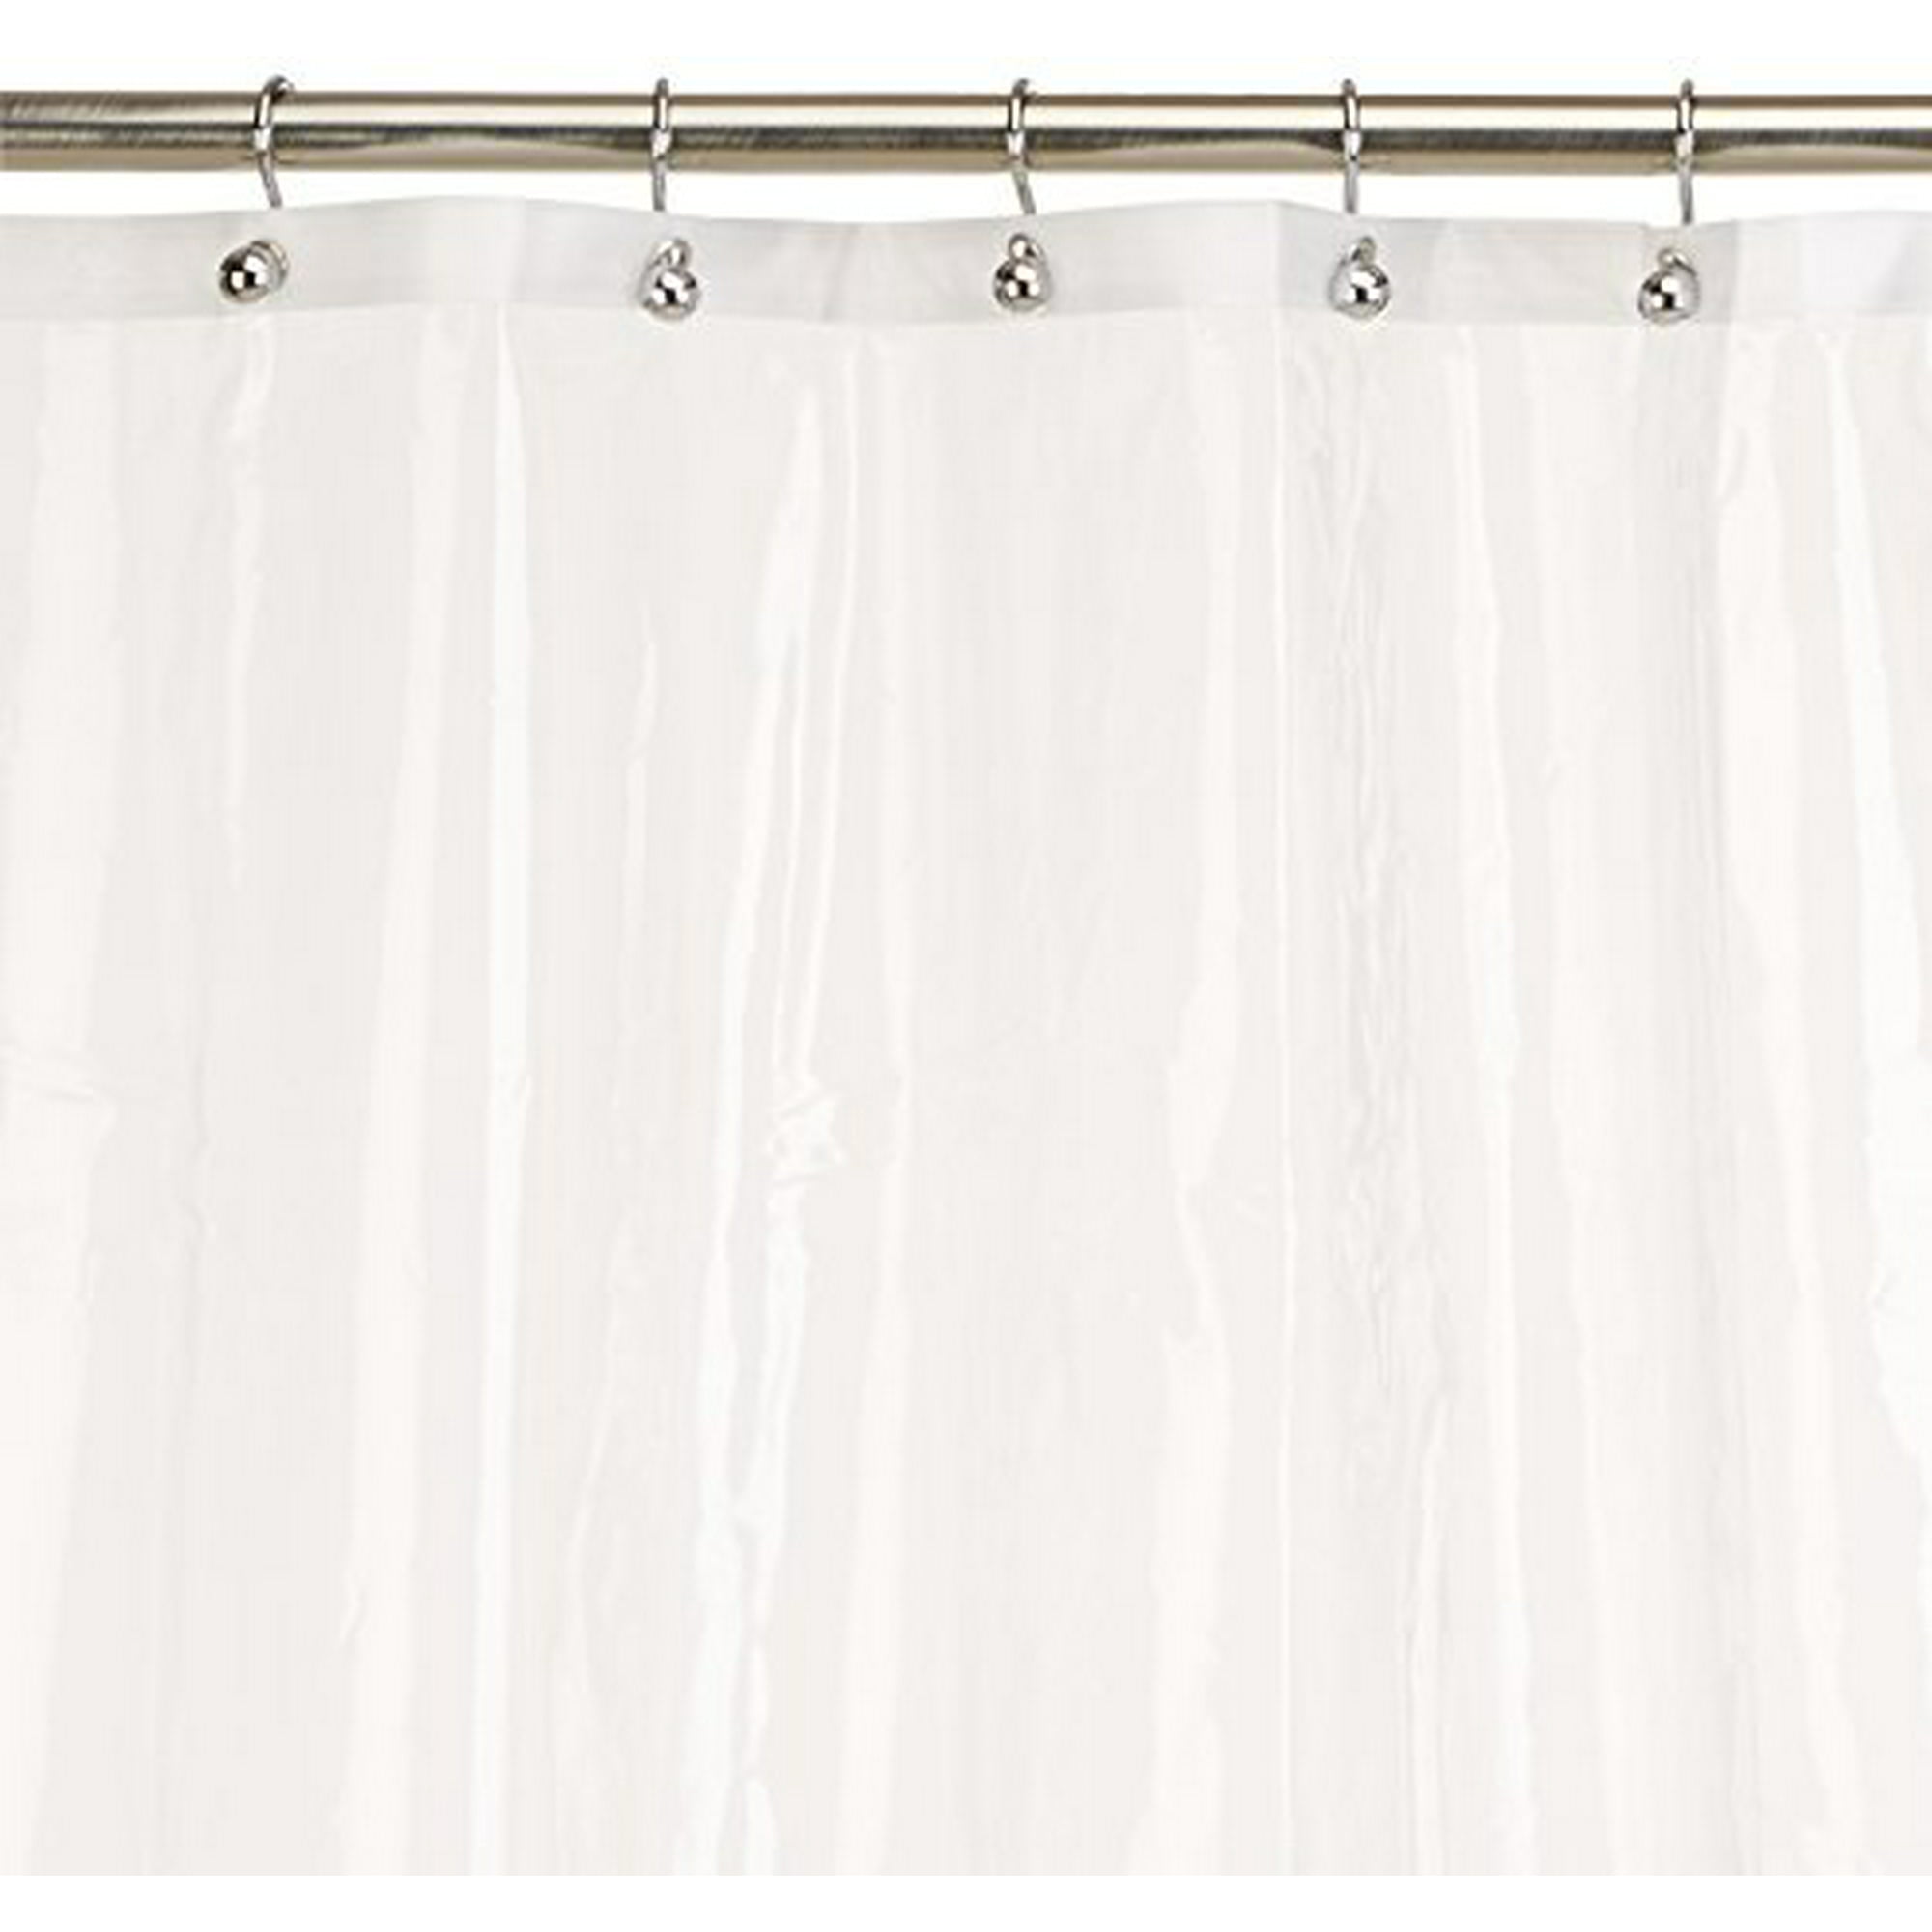 Carnation Home Fashions 10 Gauge Peva 72 By 84 Inch Shower Curtain